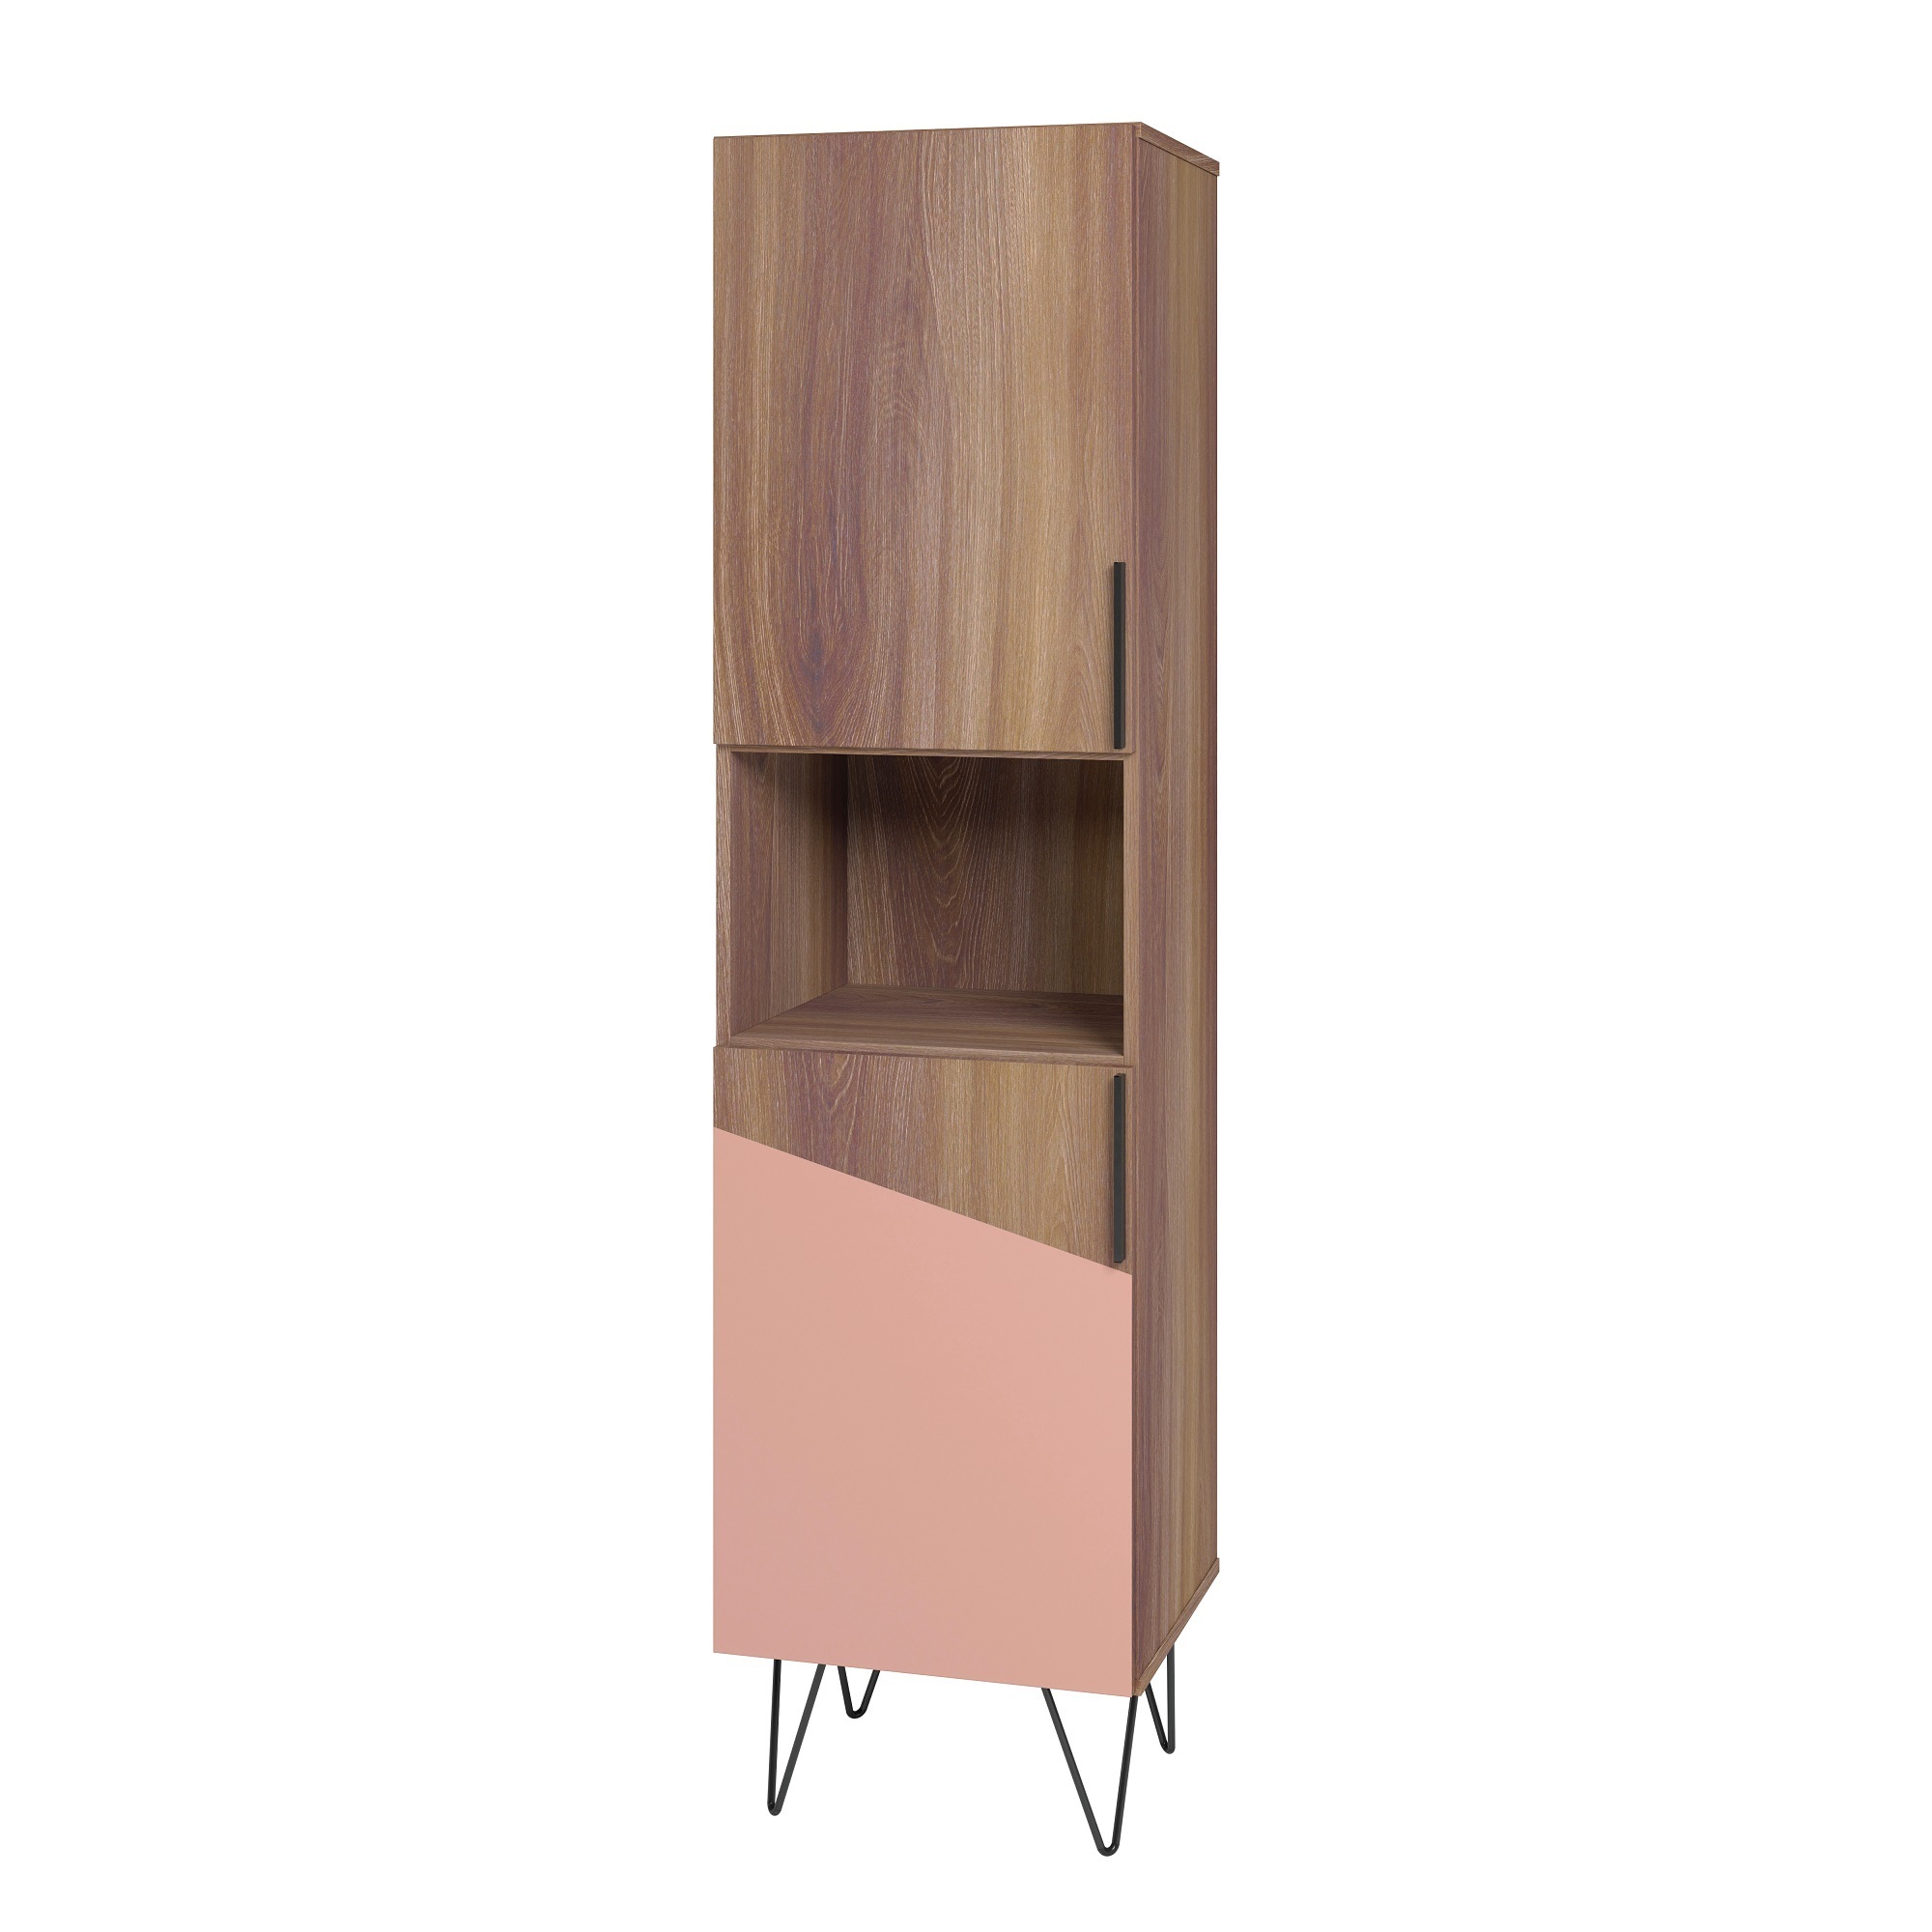 Manhattan Comfort, Beekman 17.51 Narrow Bookcase in Brown and Pink, Height 67.32 in, Shelves (qty.) 5 Material MDPE, Model 404AMC